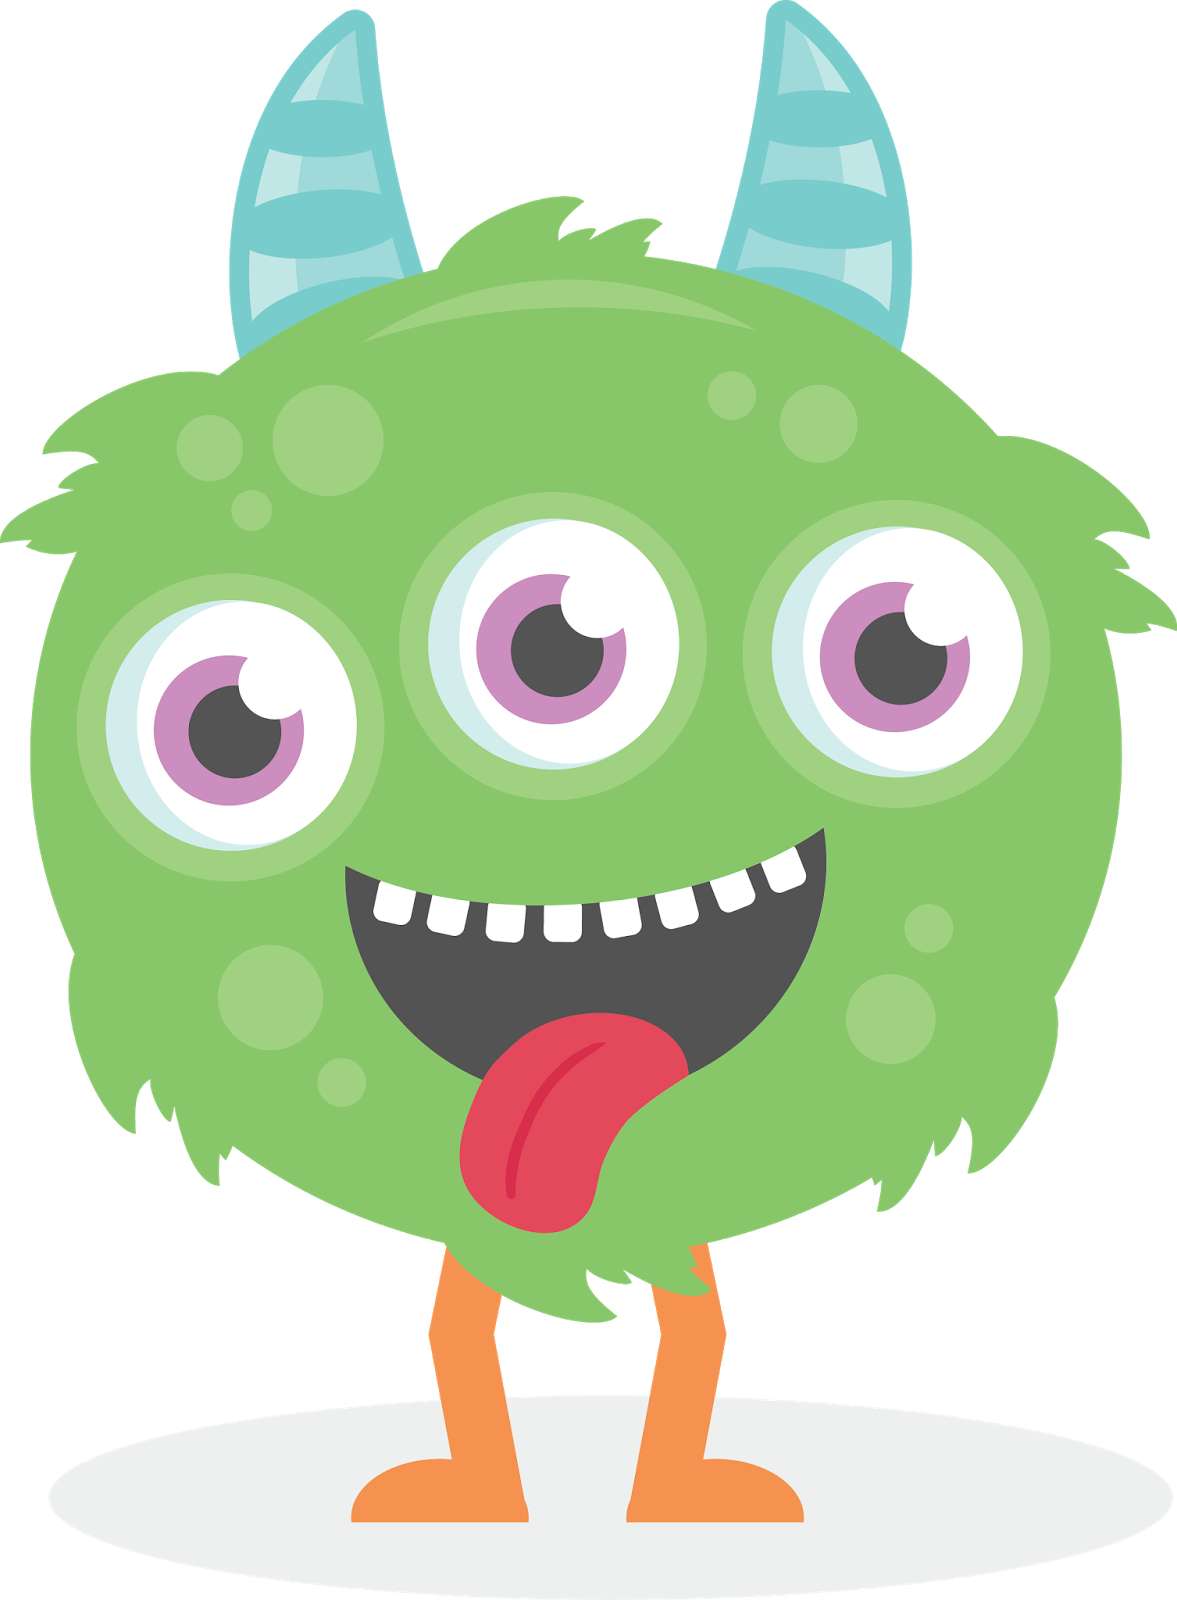 Zoo fun miss kate. Monster clipart five eyed